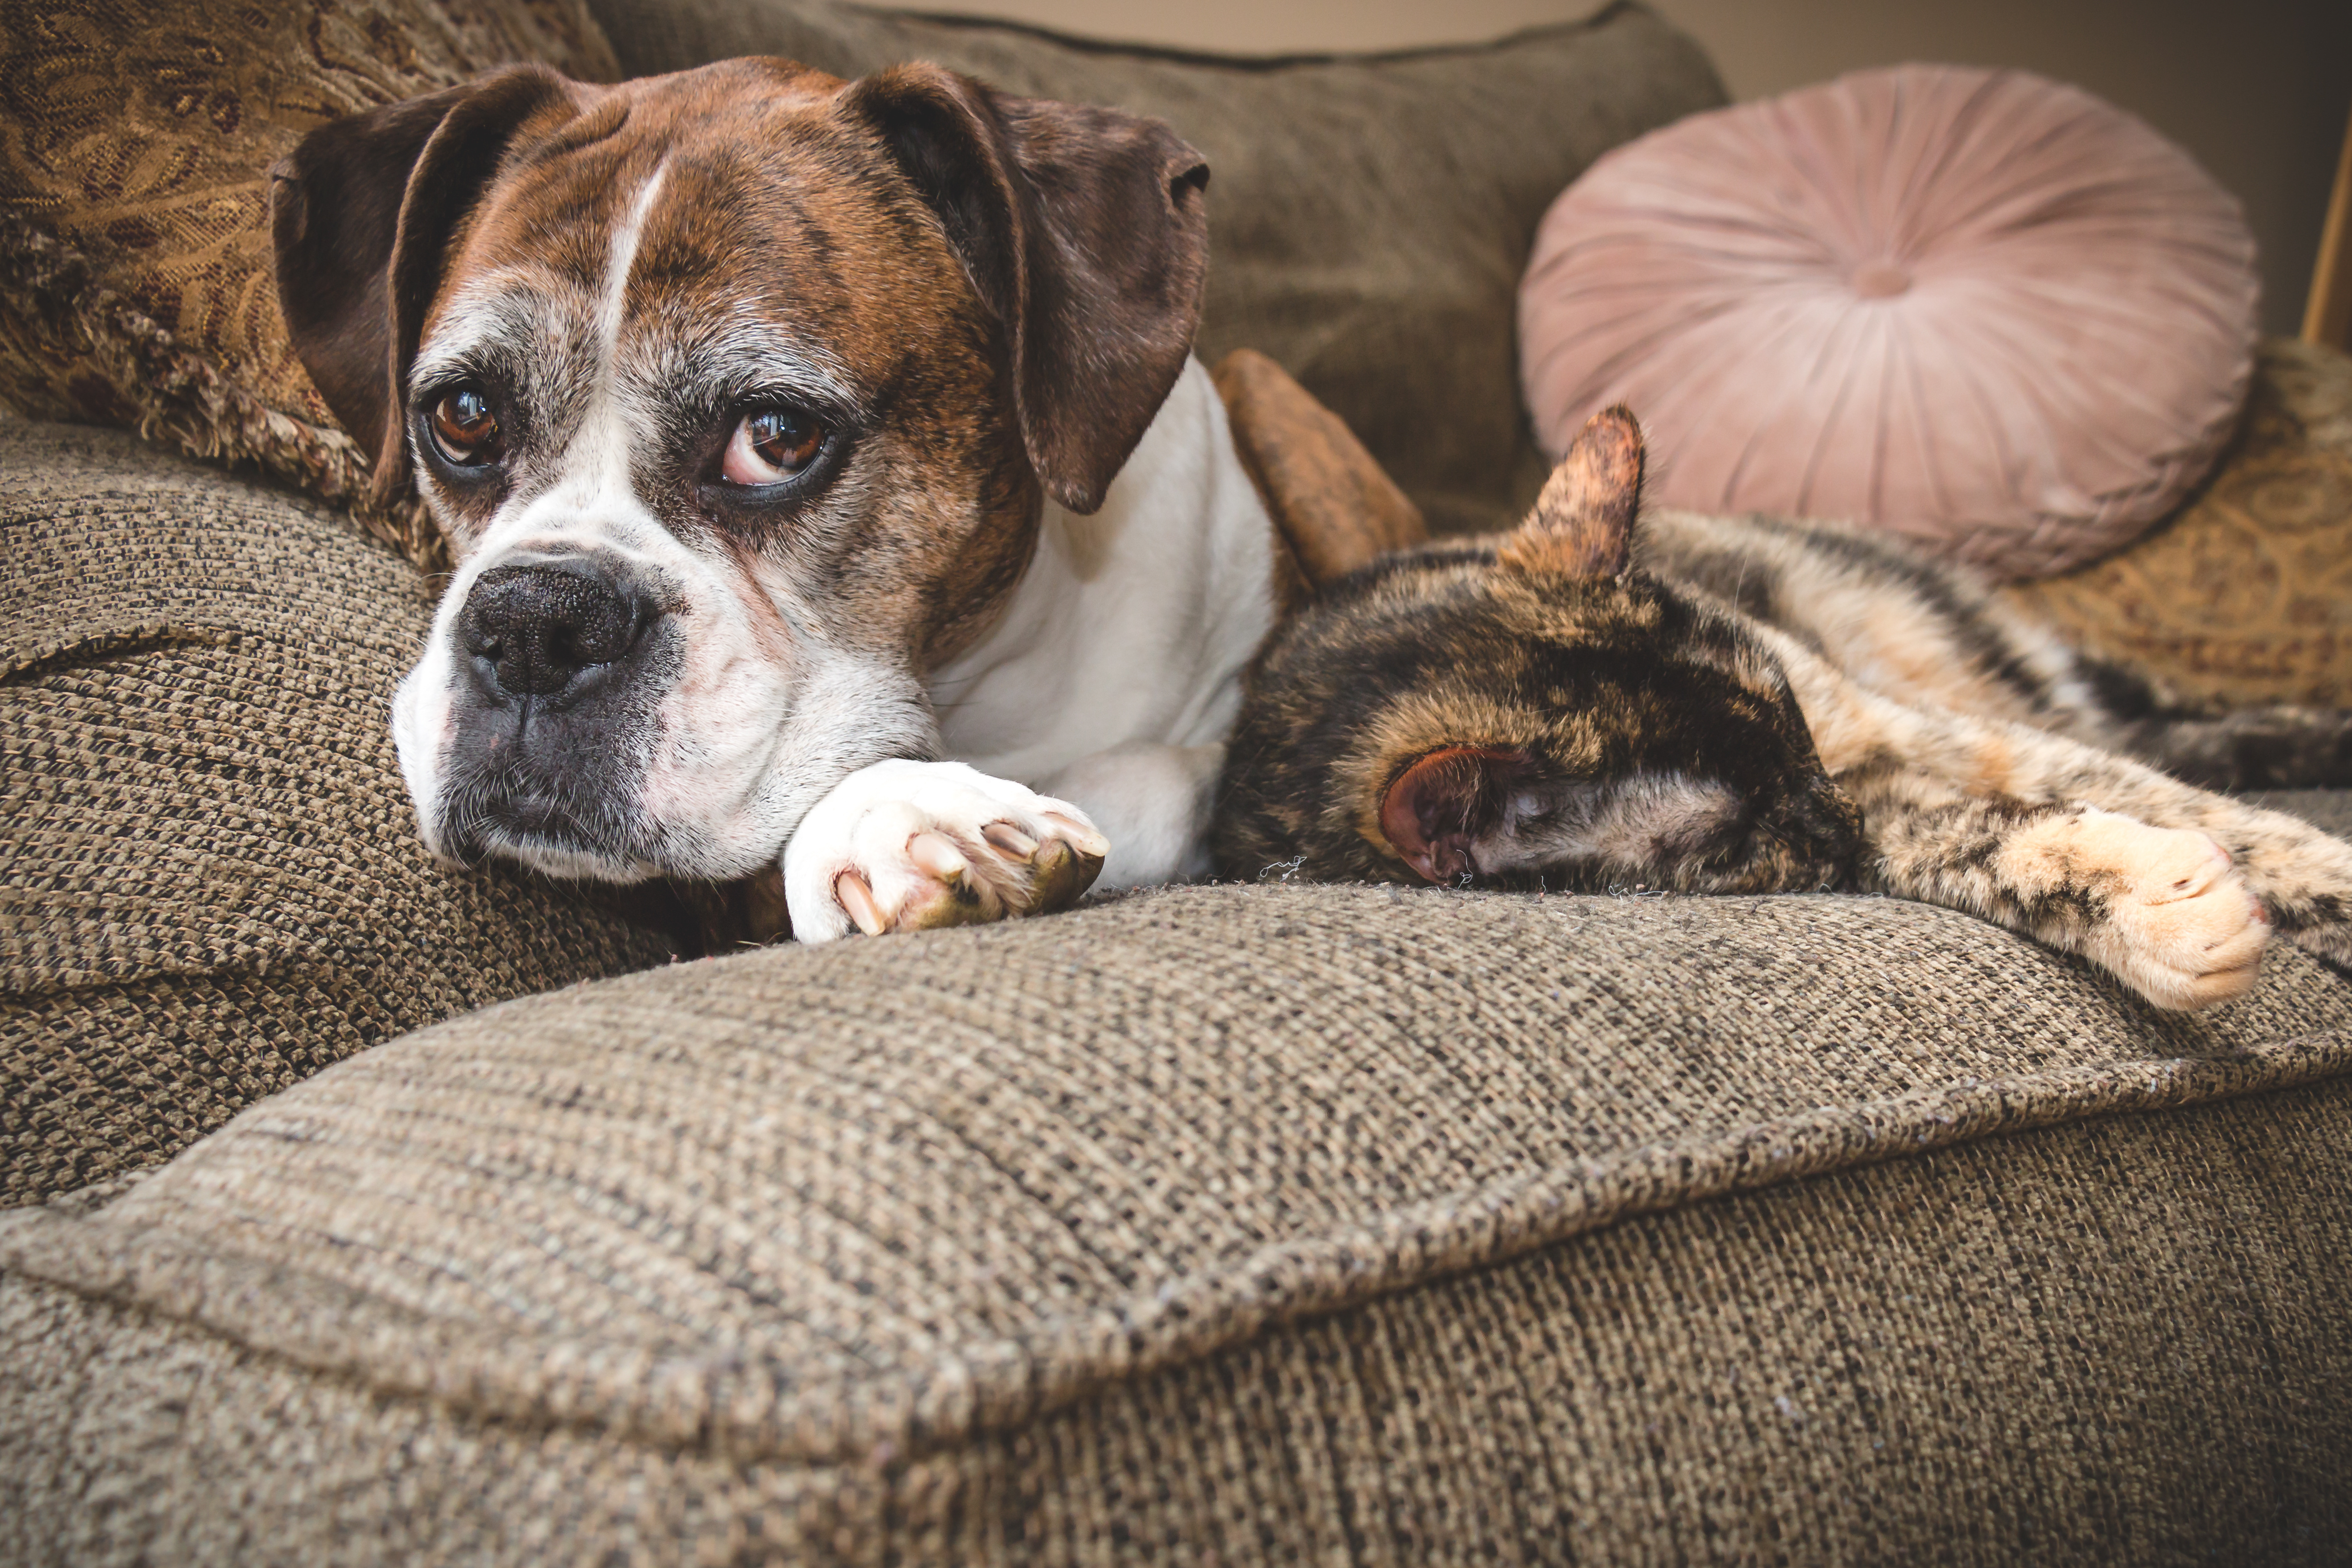 Dog and cat on couch